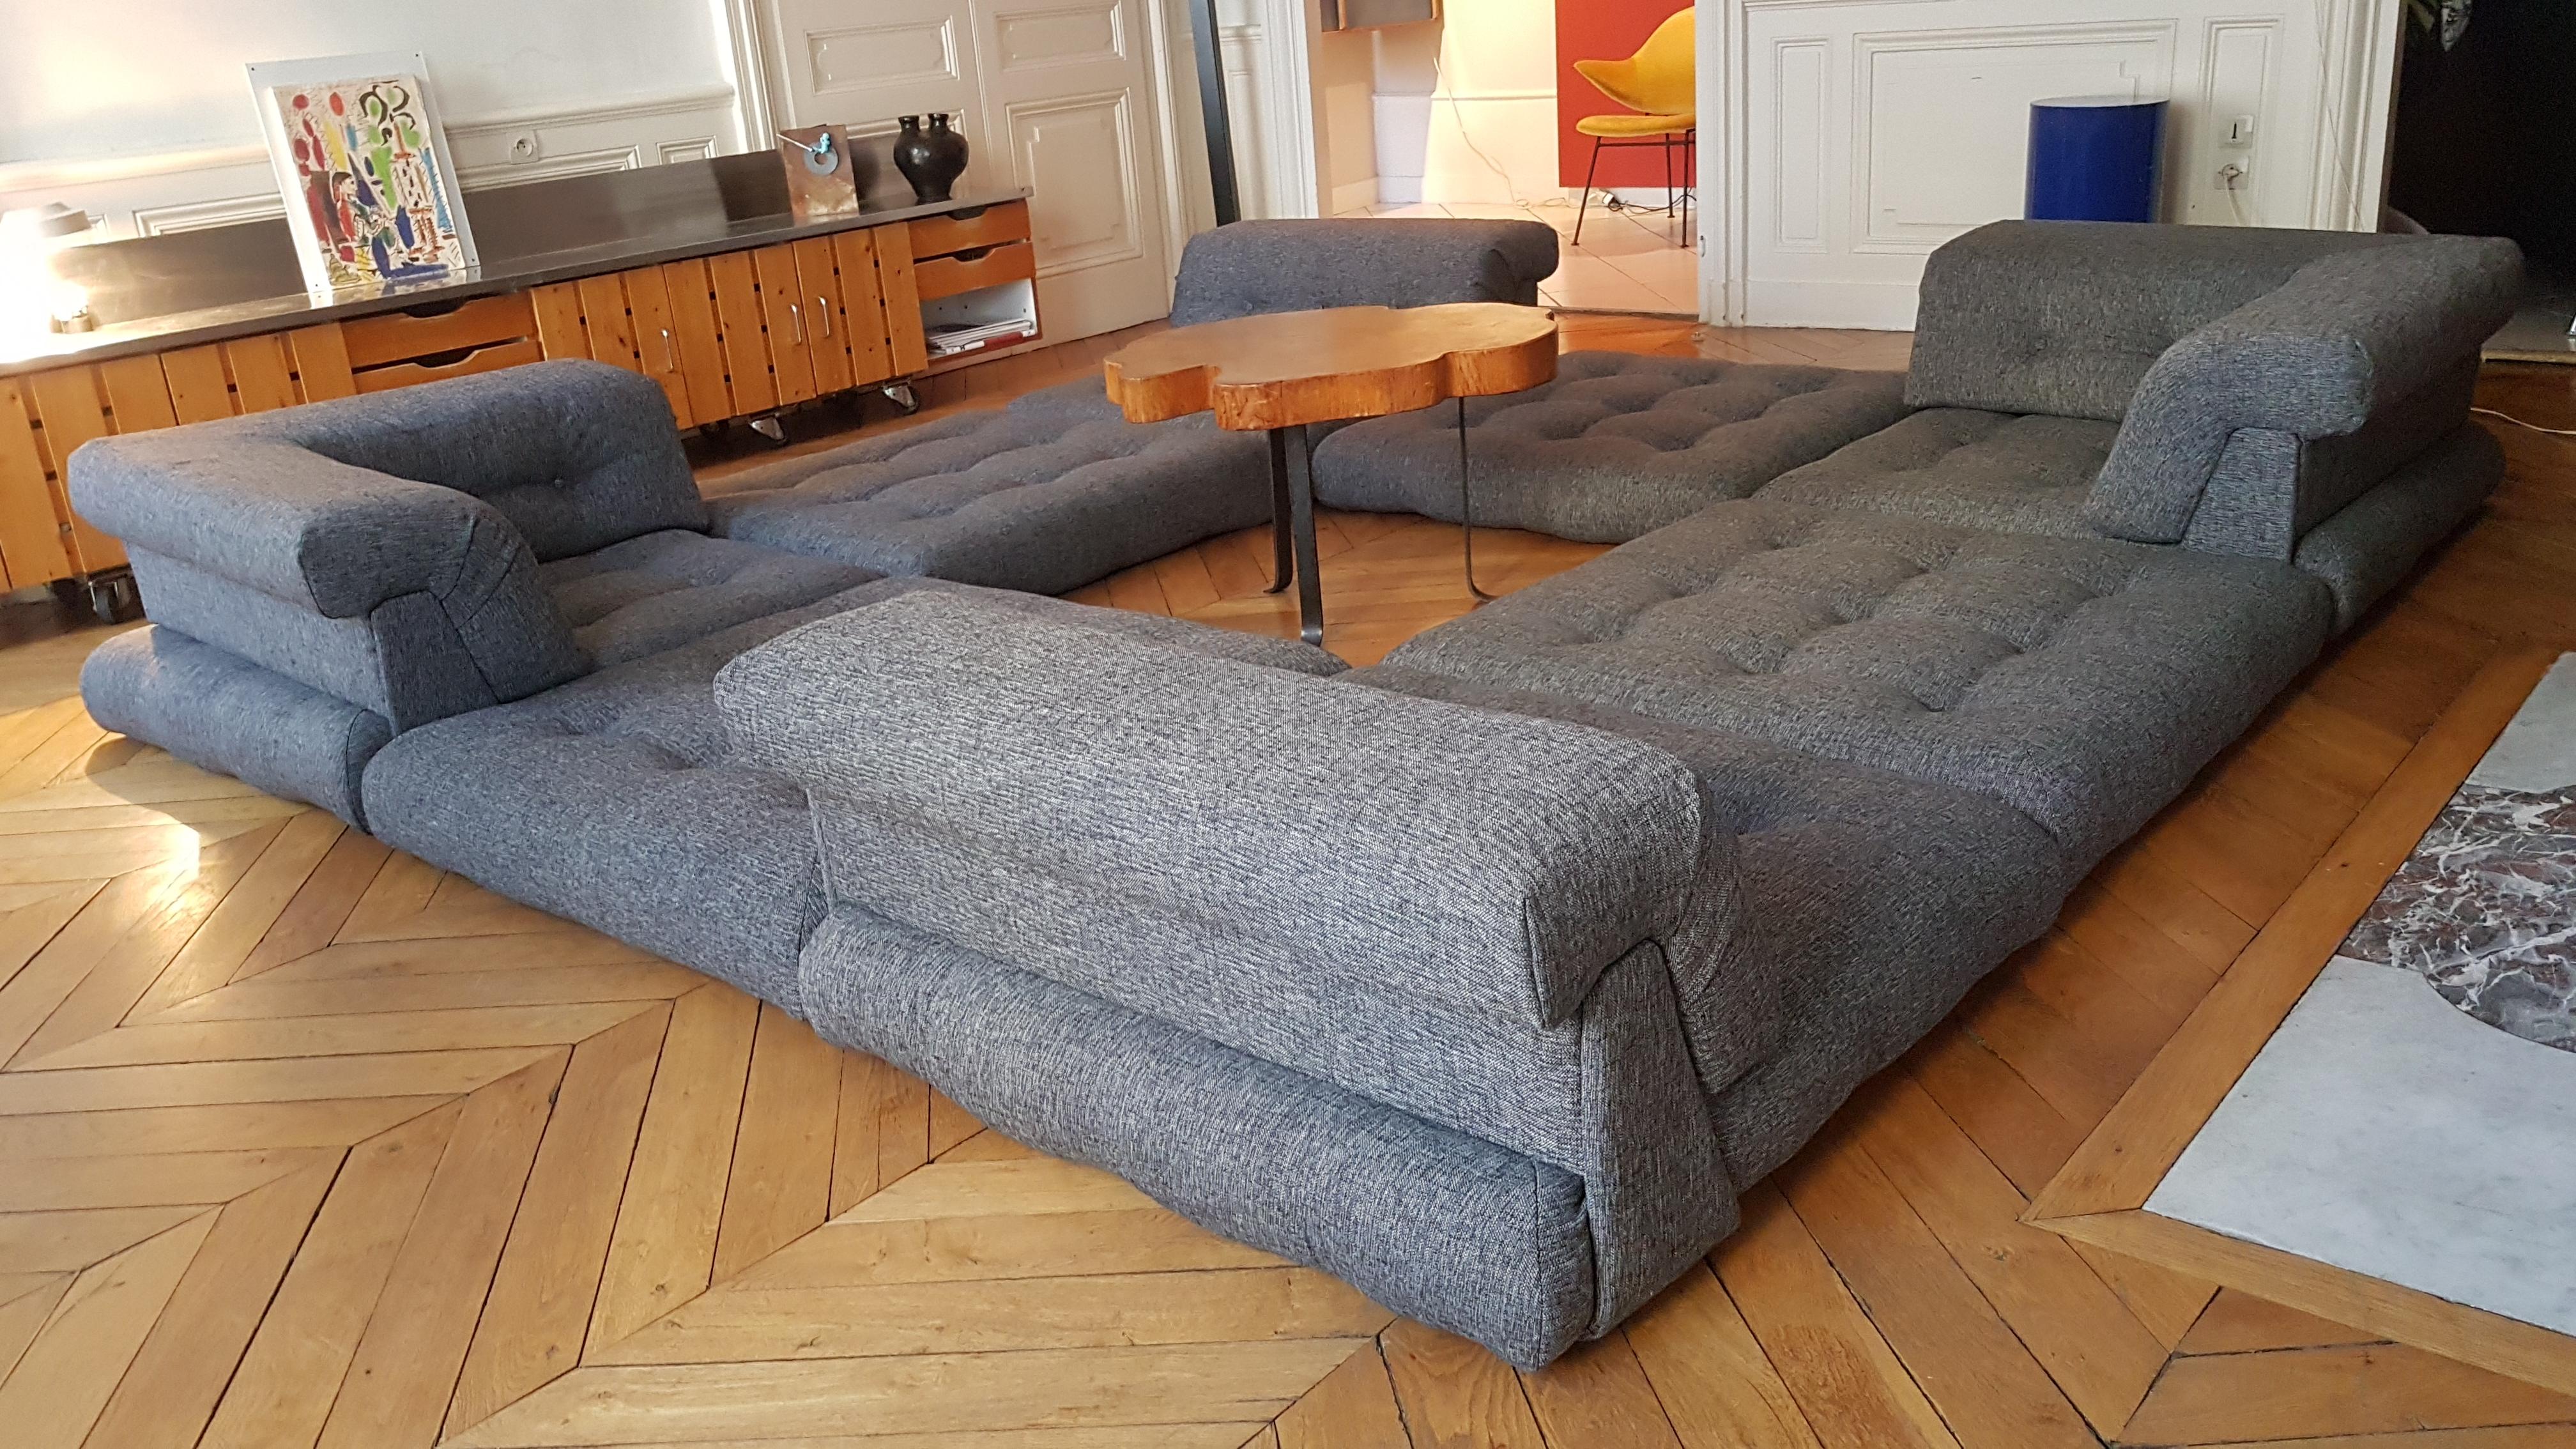 Hans Hopfer mahjong sofa from 1970. Exceptional sofa very design this component of eight seat cushions and four folders all in perfect excellent condition. The canvas is new in anthracite gray color. Original fully modular sofa mingling with all